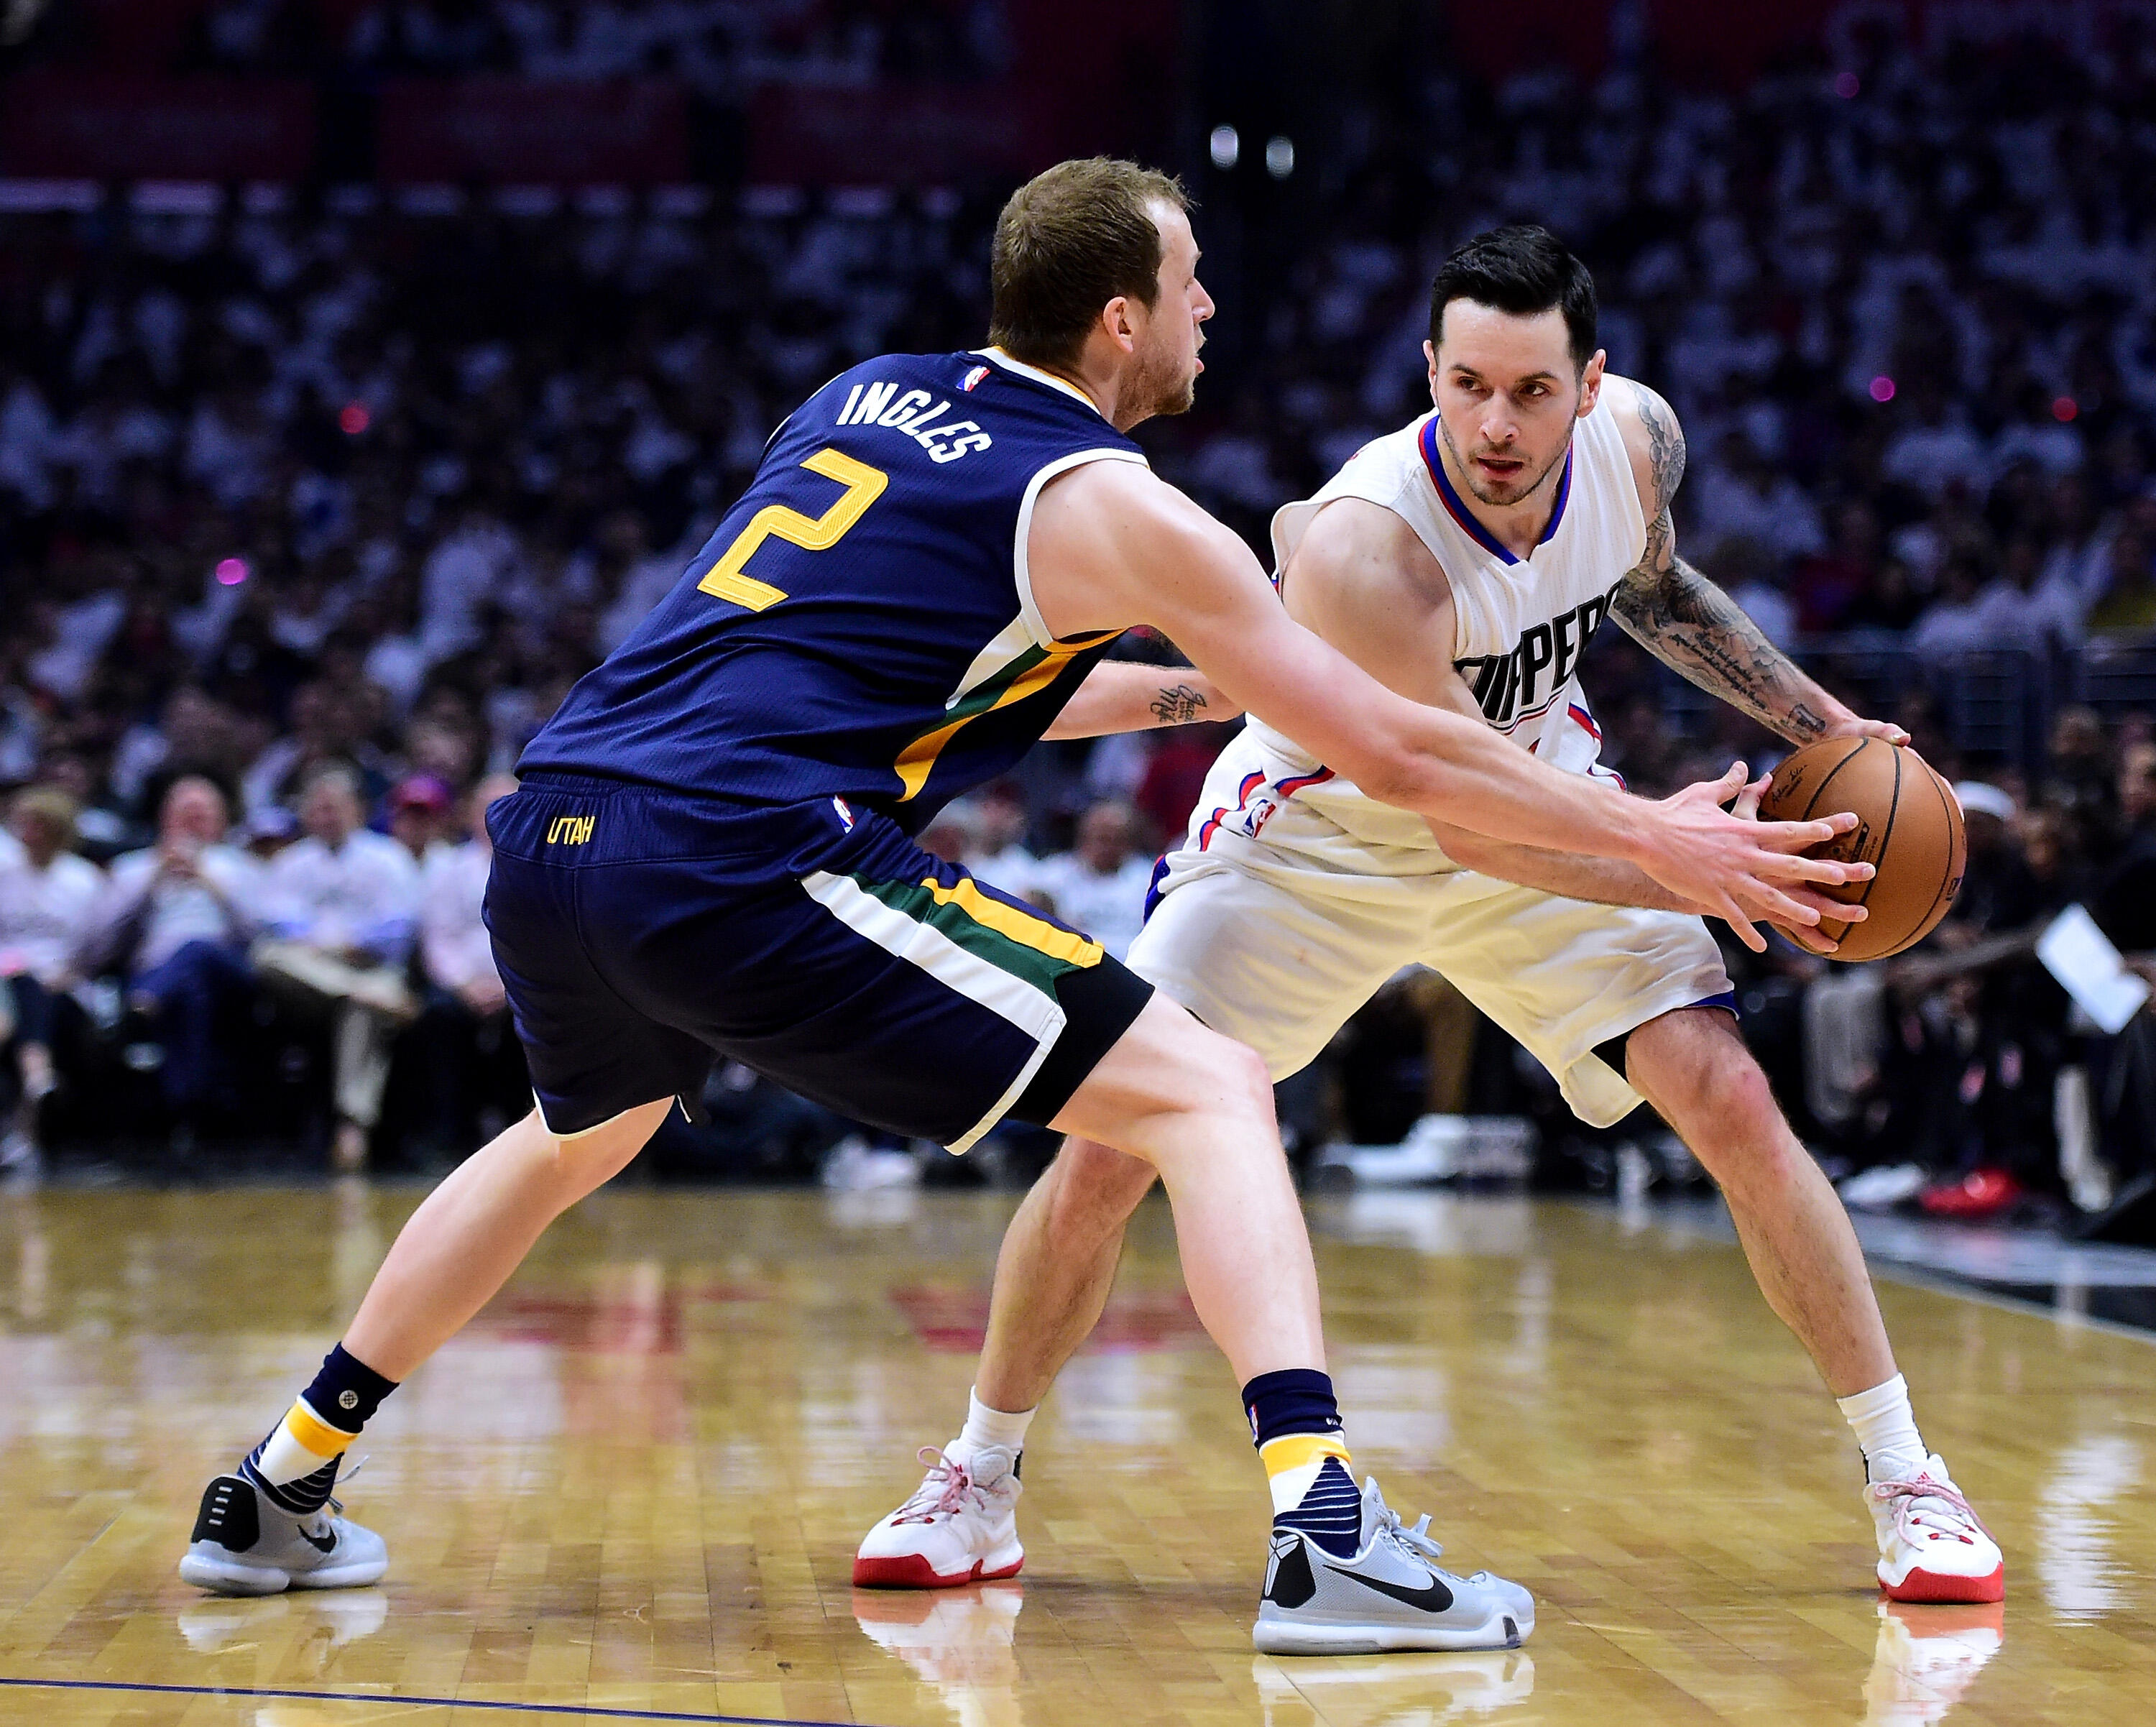 LOS ANGELES, CA - APRIL 15:  JJ Redick #4 of the LA Clippers is guarded by Joe Ingles #2 of the Utah Jazz during a 97-95 Jazz win during the first half at Staples Center on April 15, 2017 in Los Angeles, California.  NOTE TO USER: User expressly acknowled